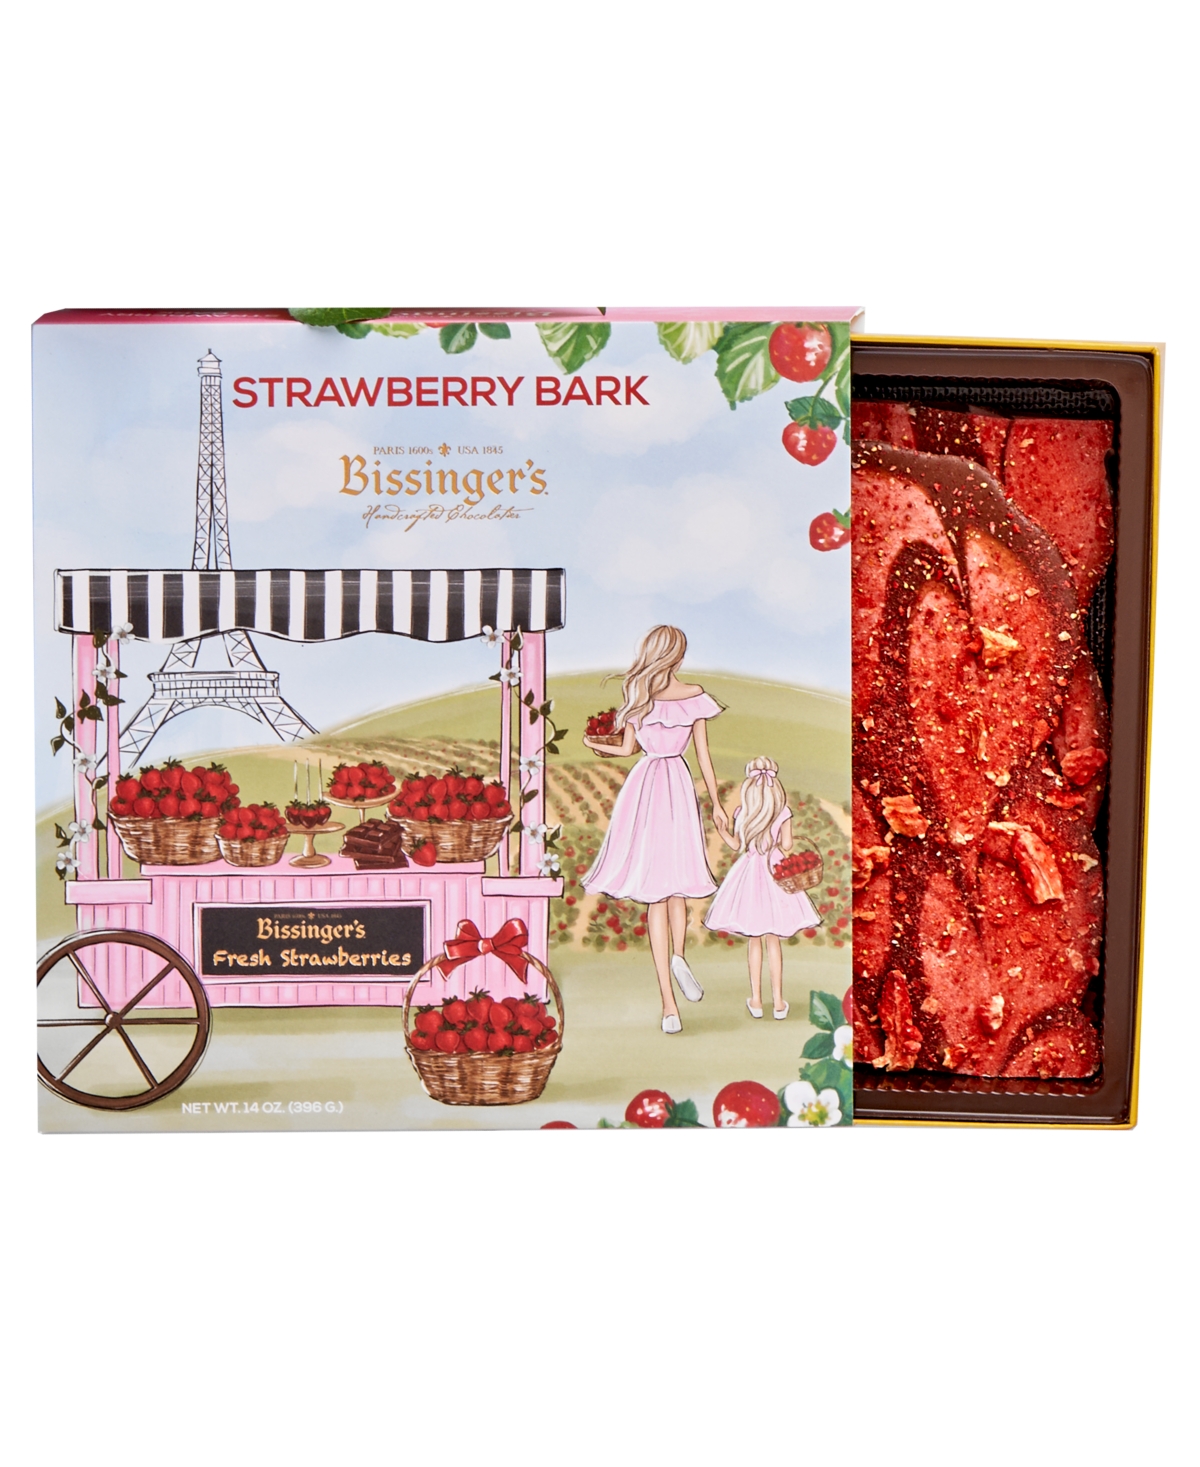 Bissinger's Handcrafted Chocolate Milk Chocolate Strawberry Bark, 14 Oz, 1 Pcs In No Color